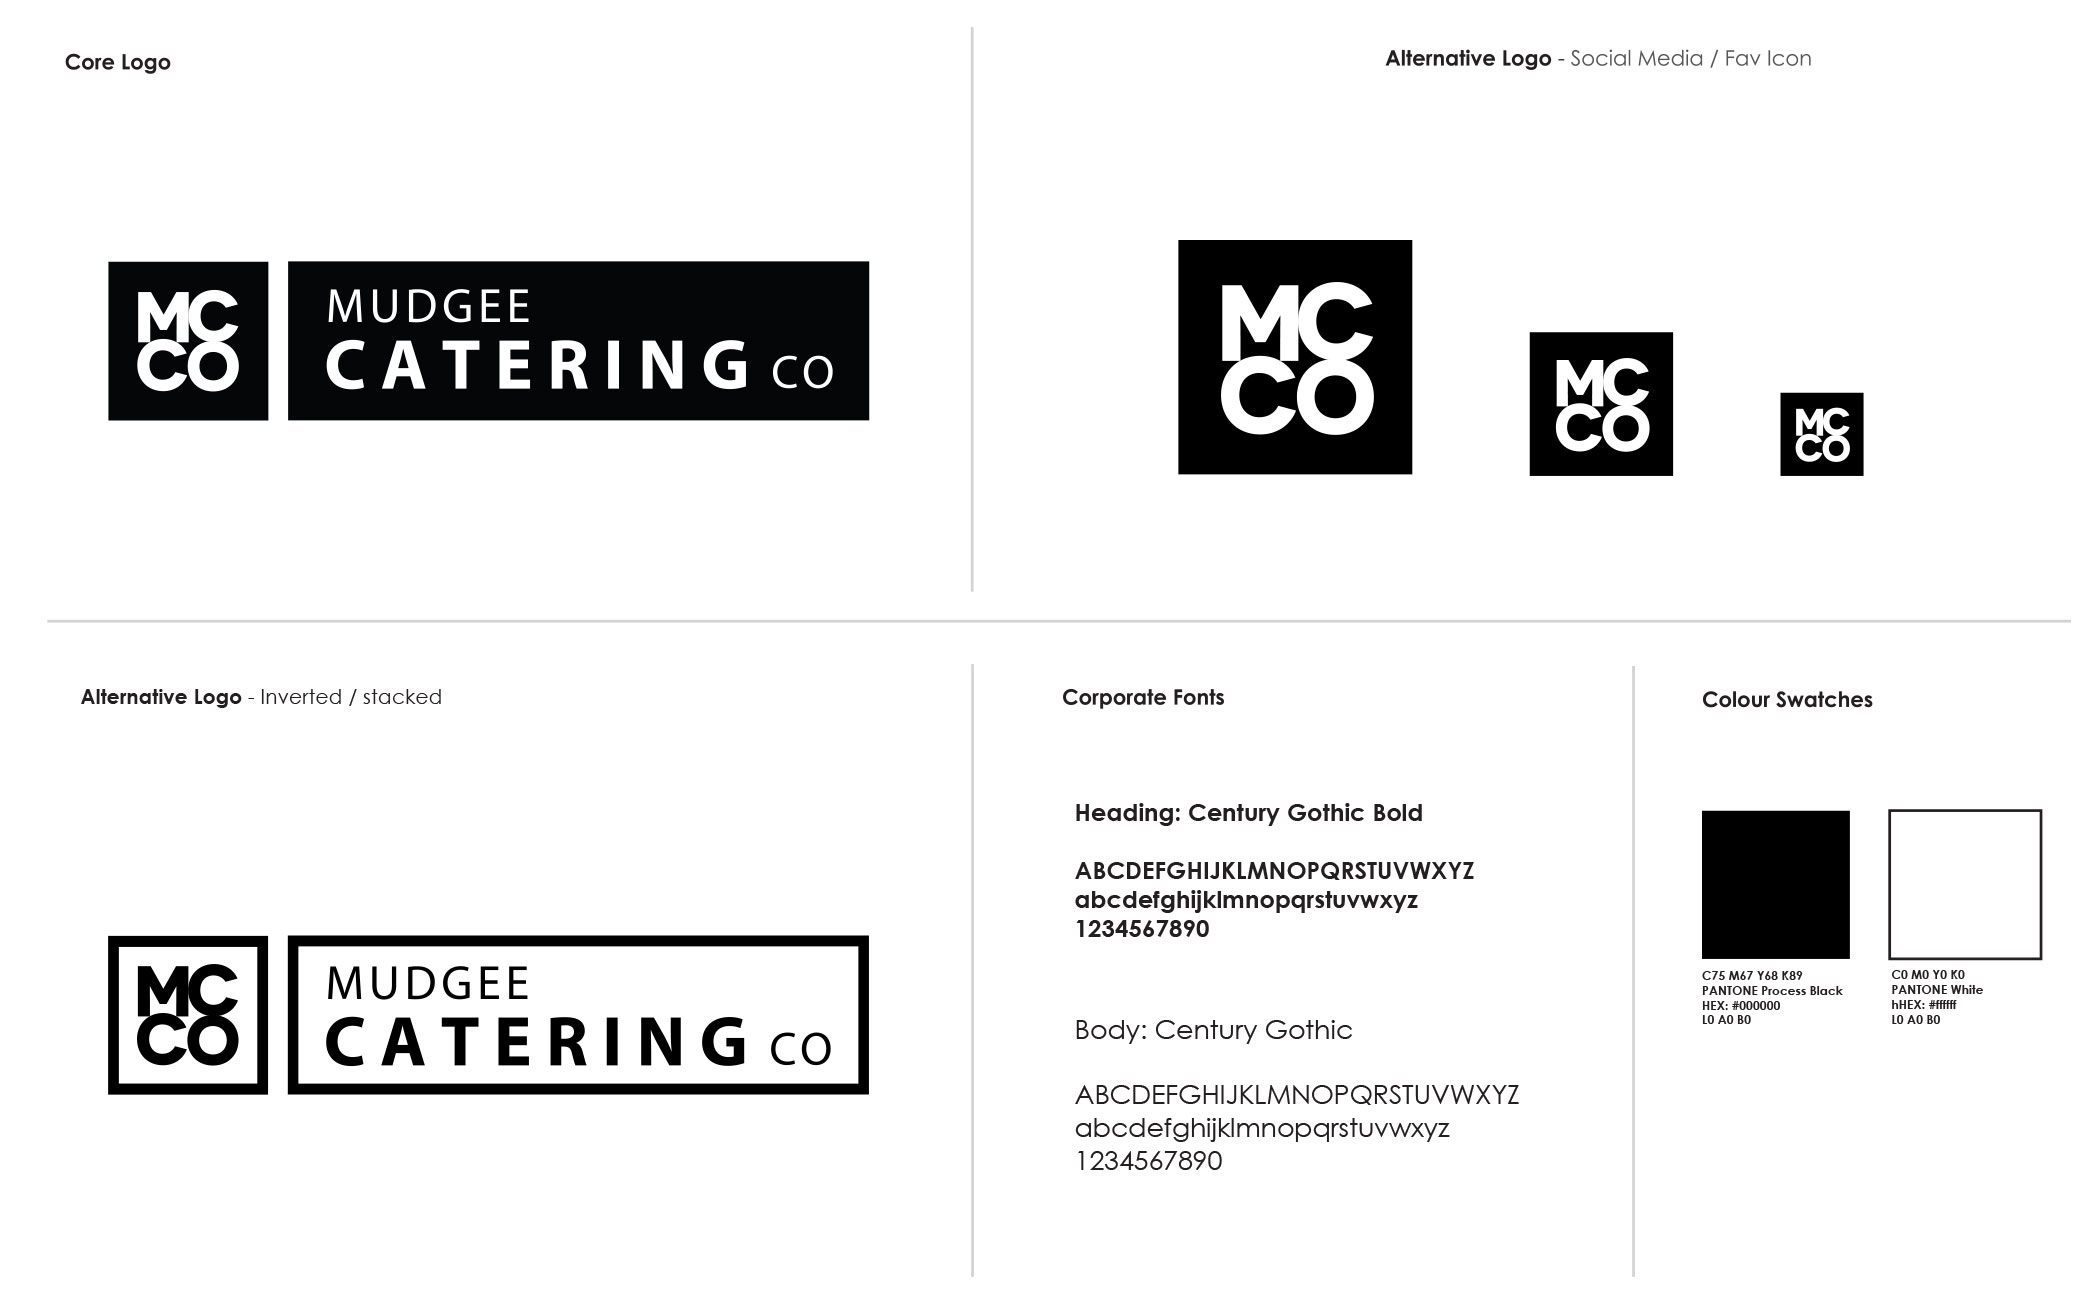 Mudgee Catering Co logo guidelines